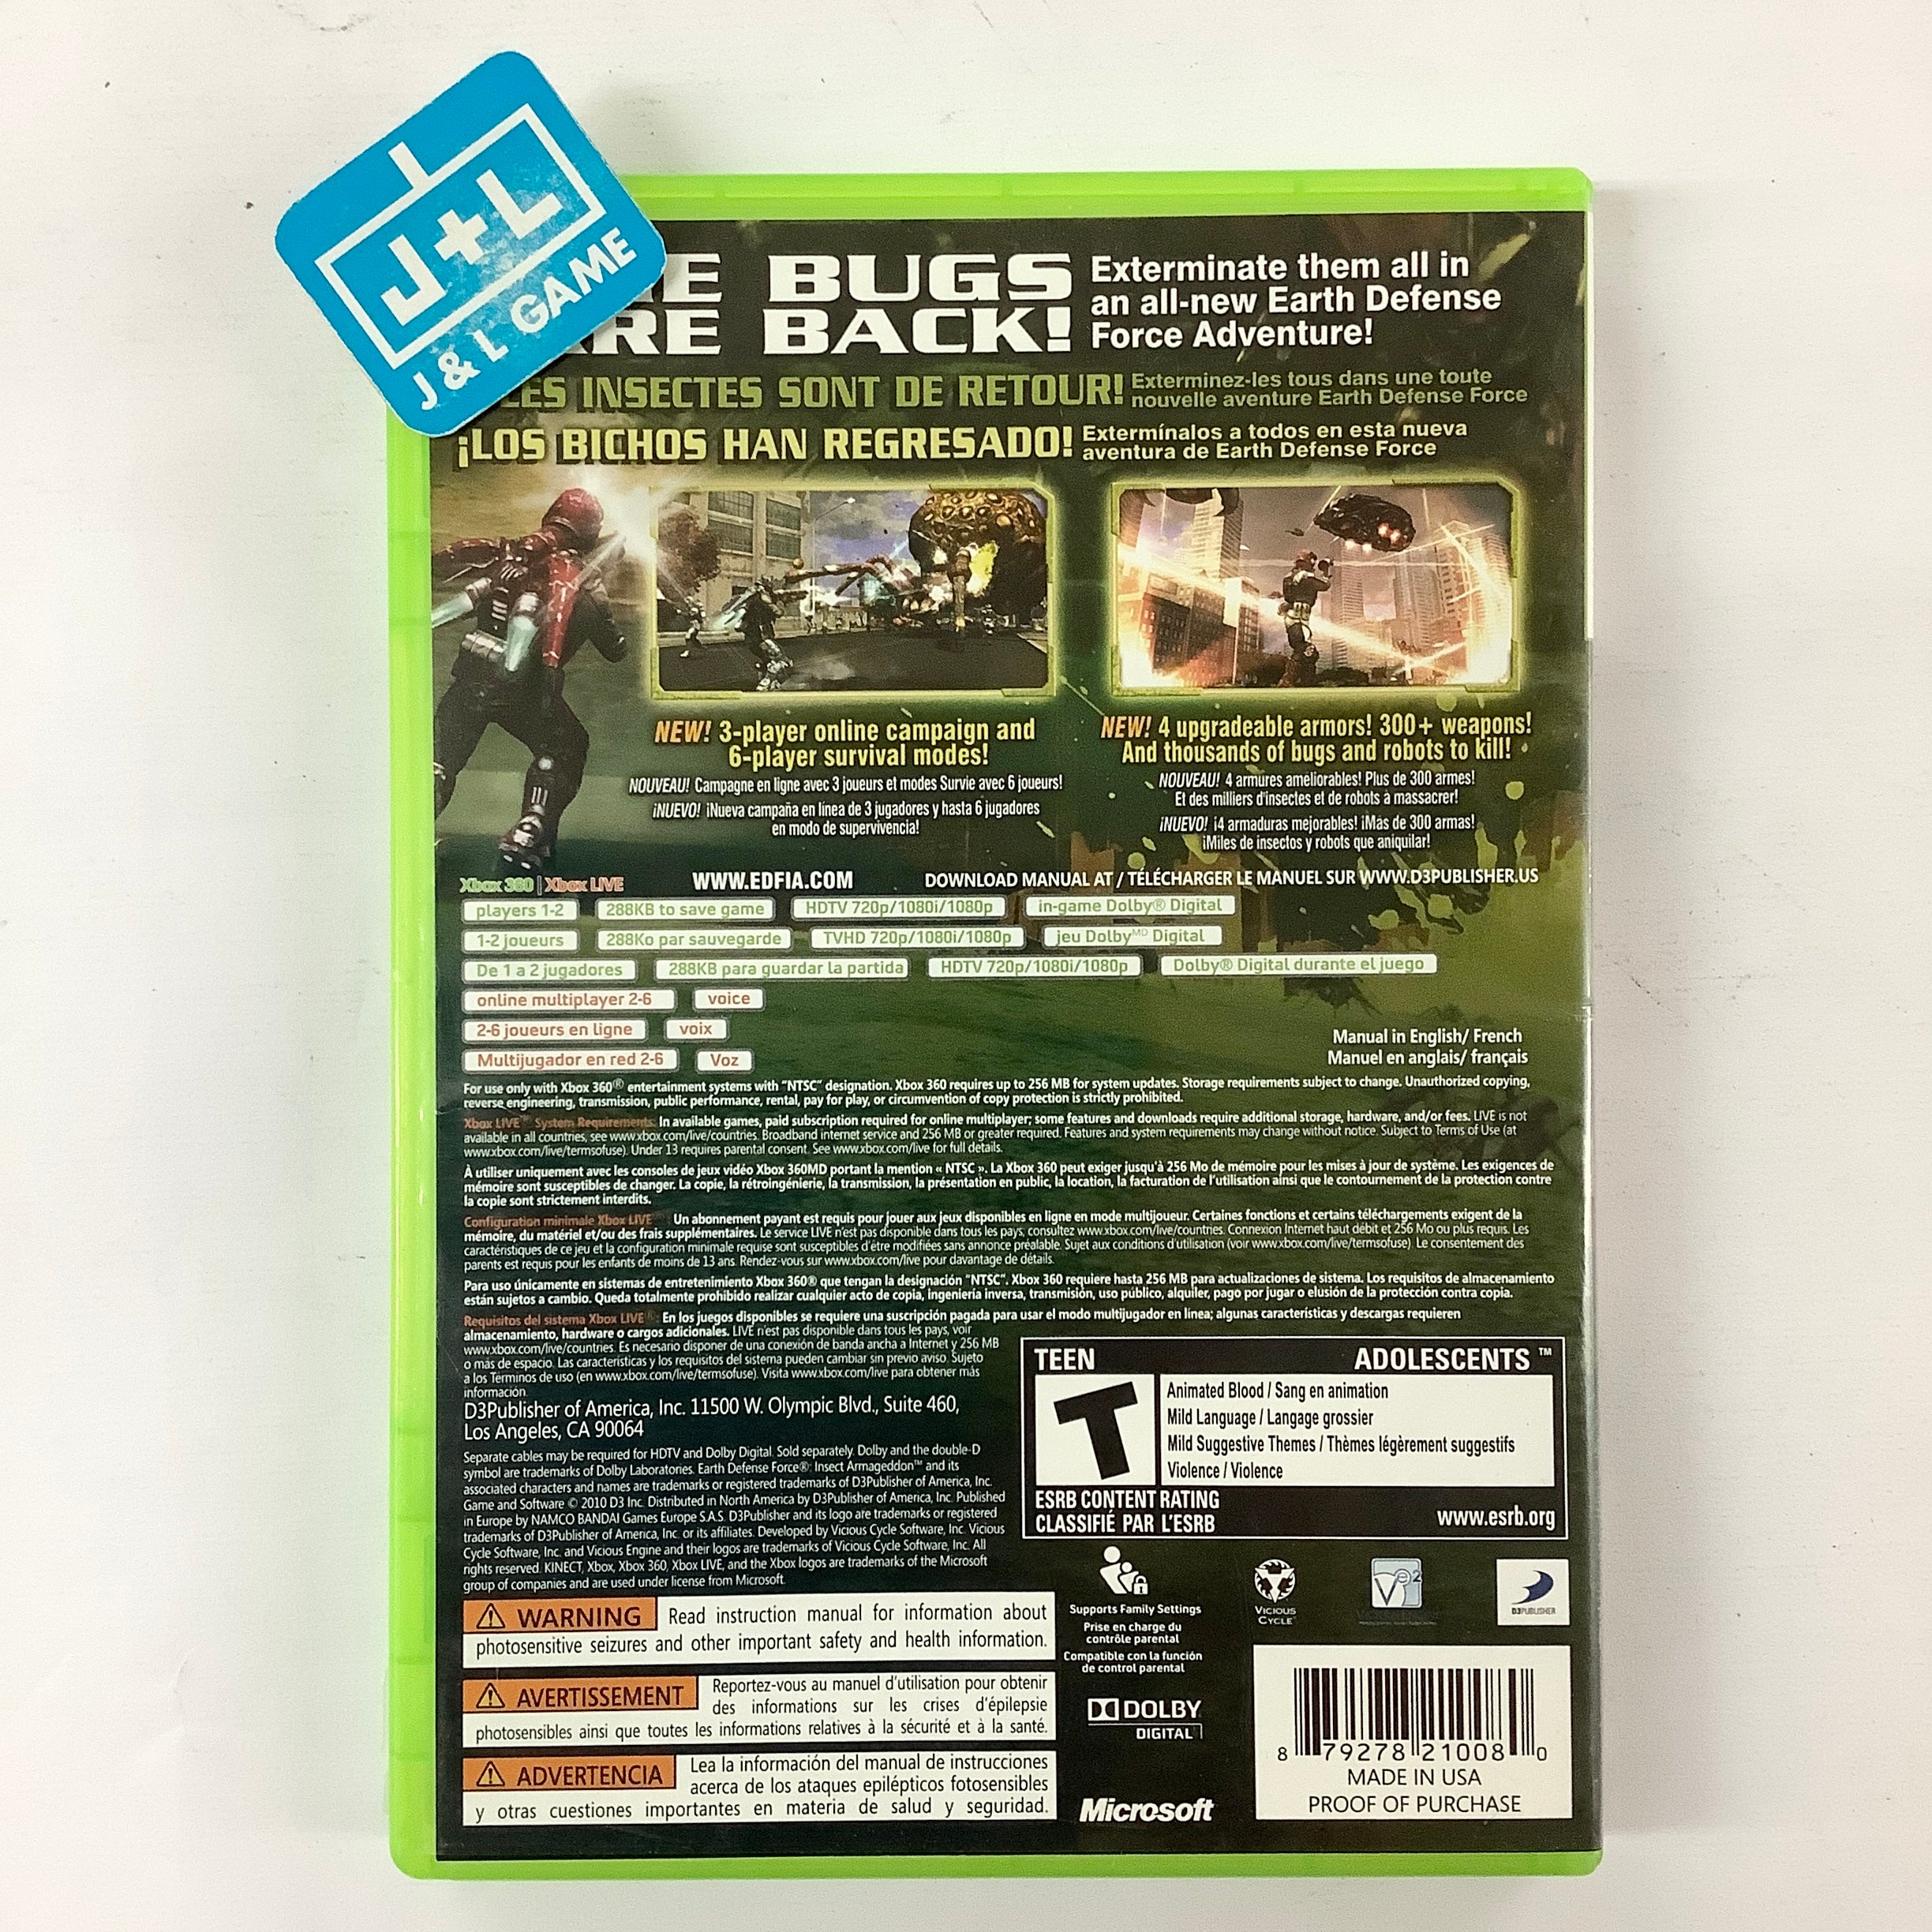 Earth Defense Force: Insect Armageddon - Xbox 360 [Pre-Owned] Video Games D3Publisher   